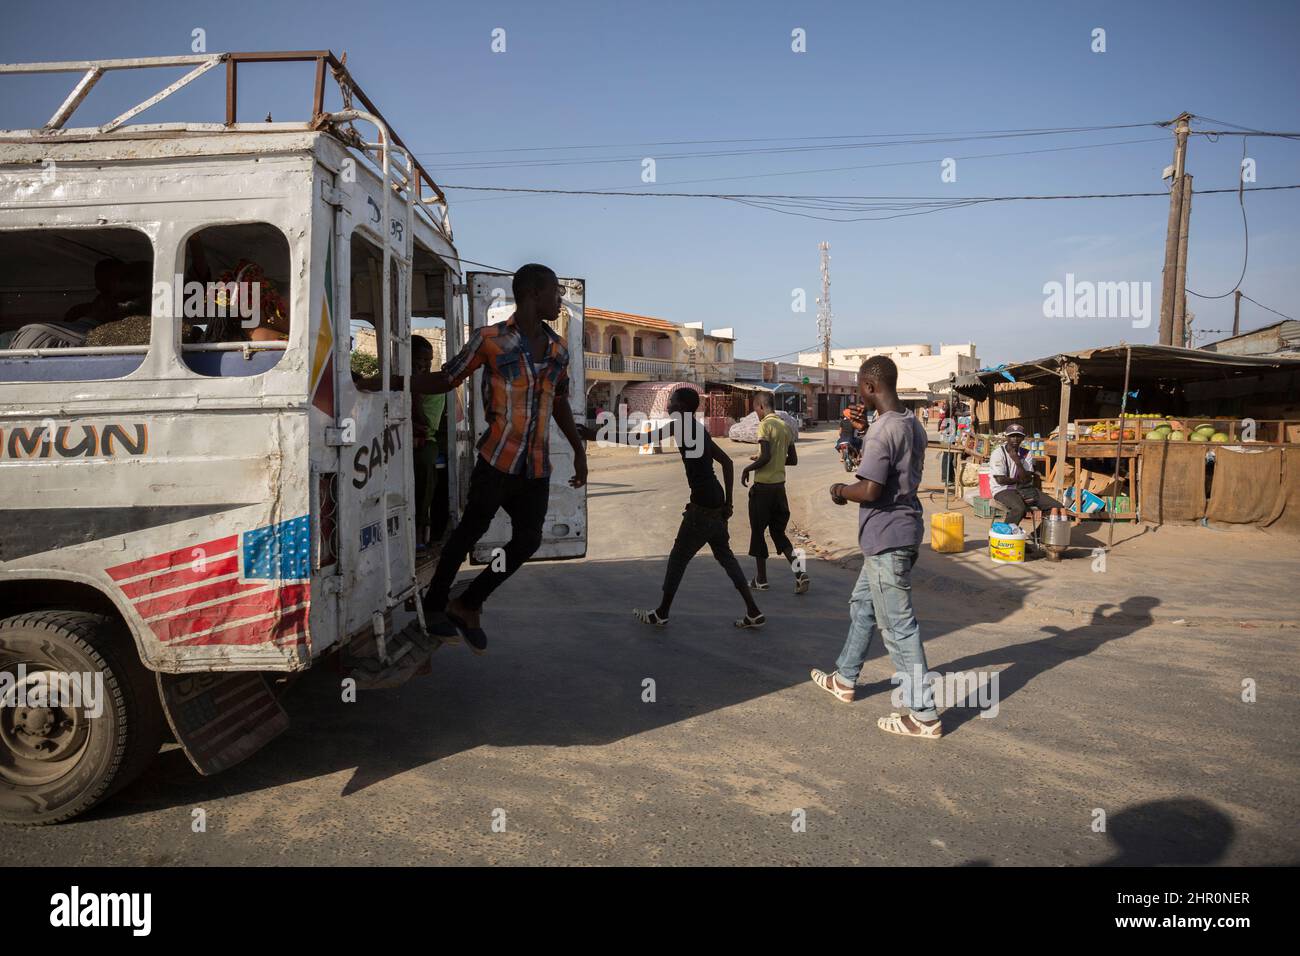 Residents of Saint Louis, in northern Senegal, commute by public transportation. Stock Photo